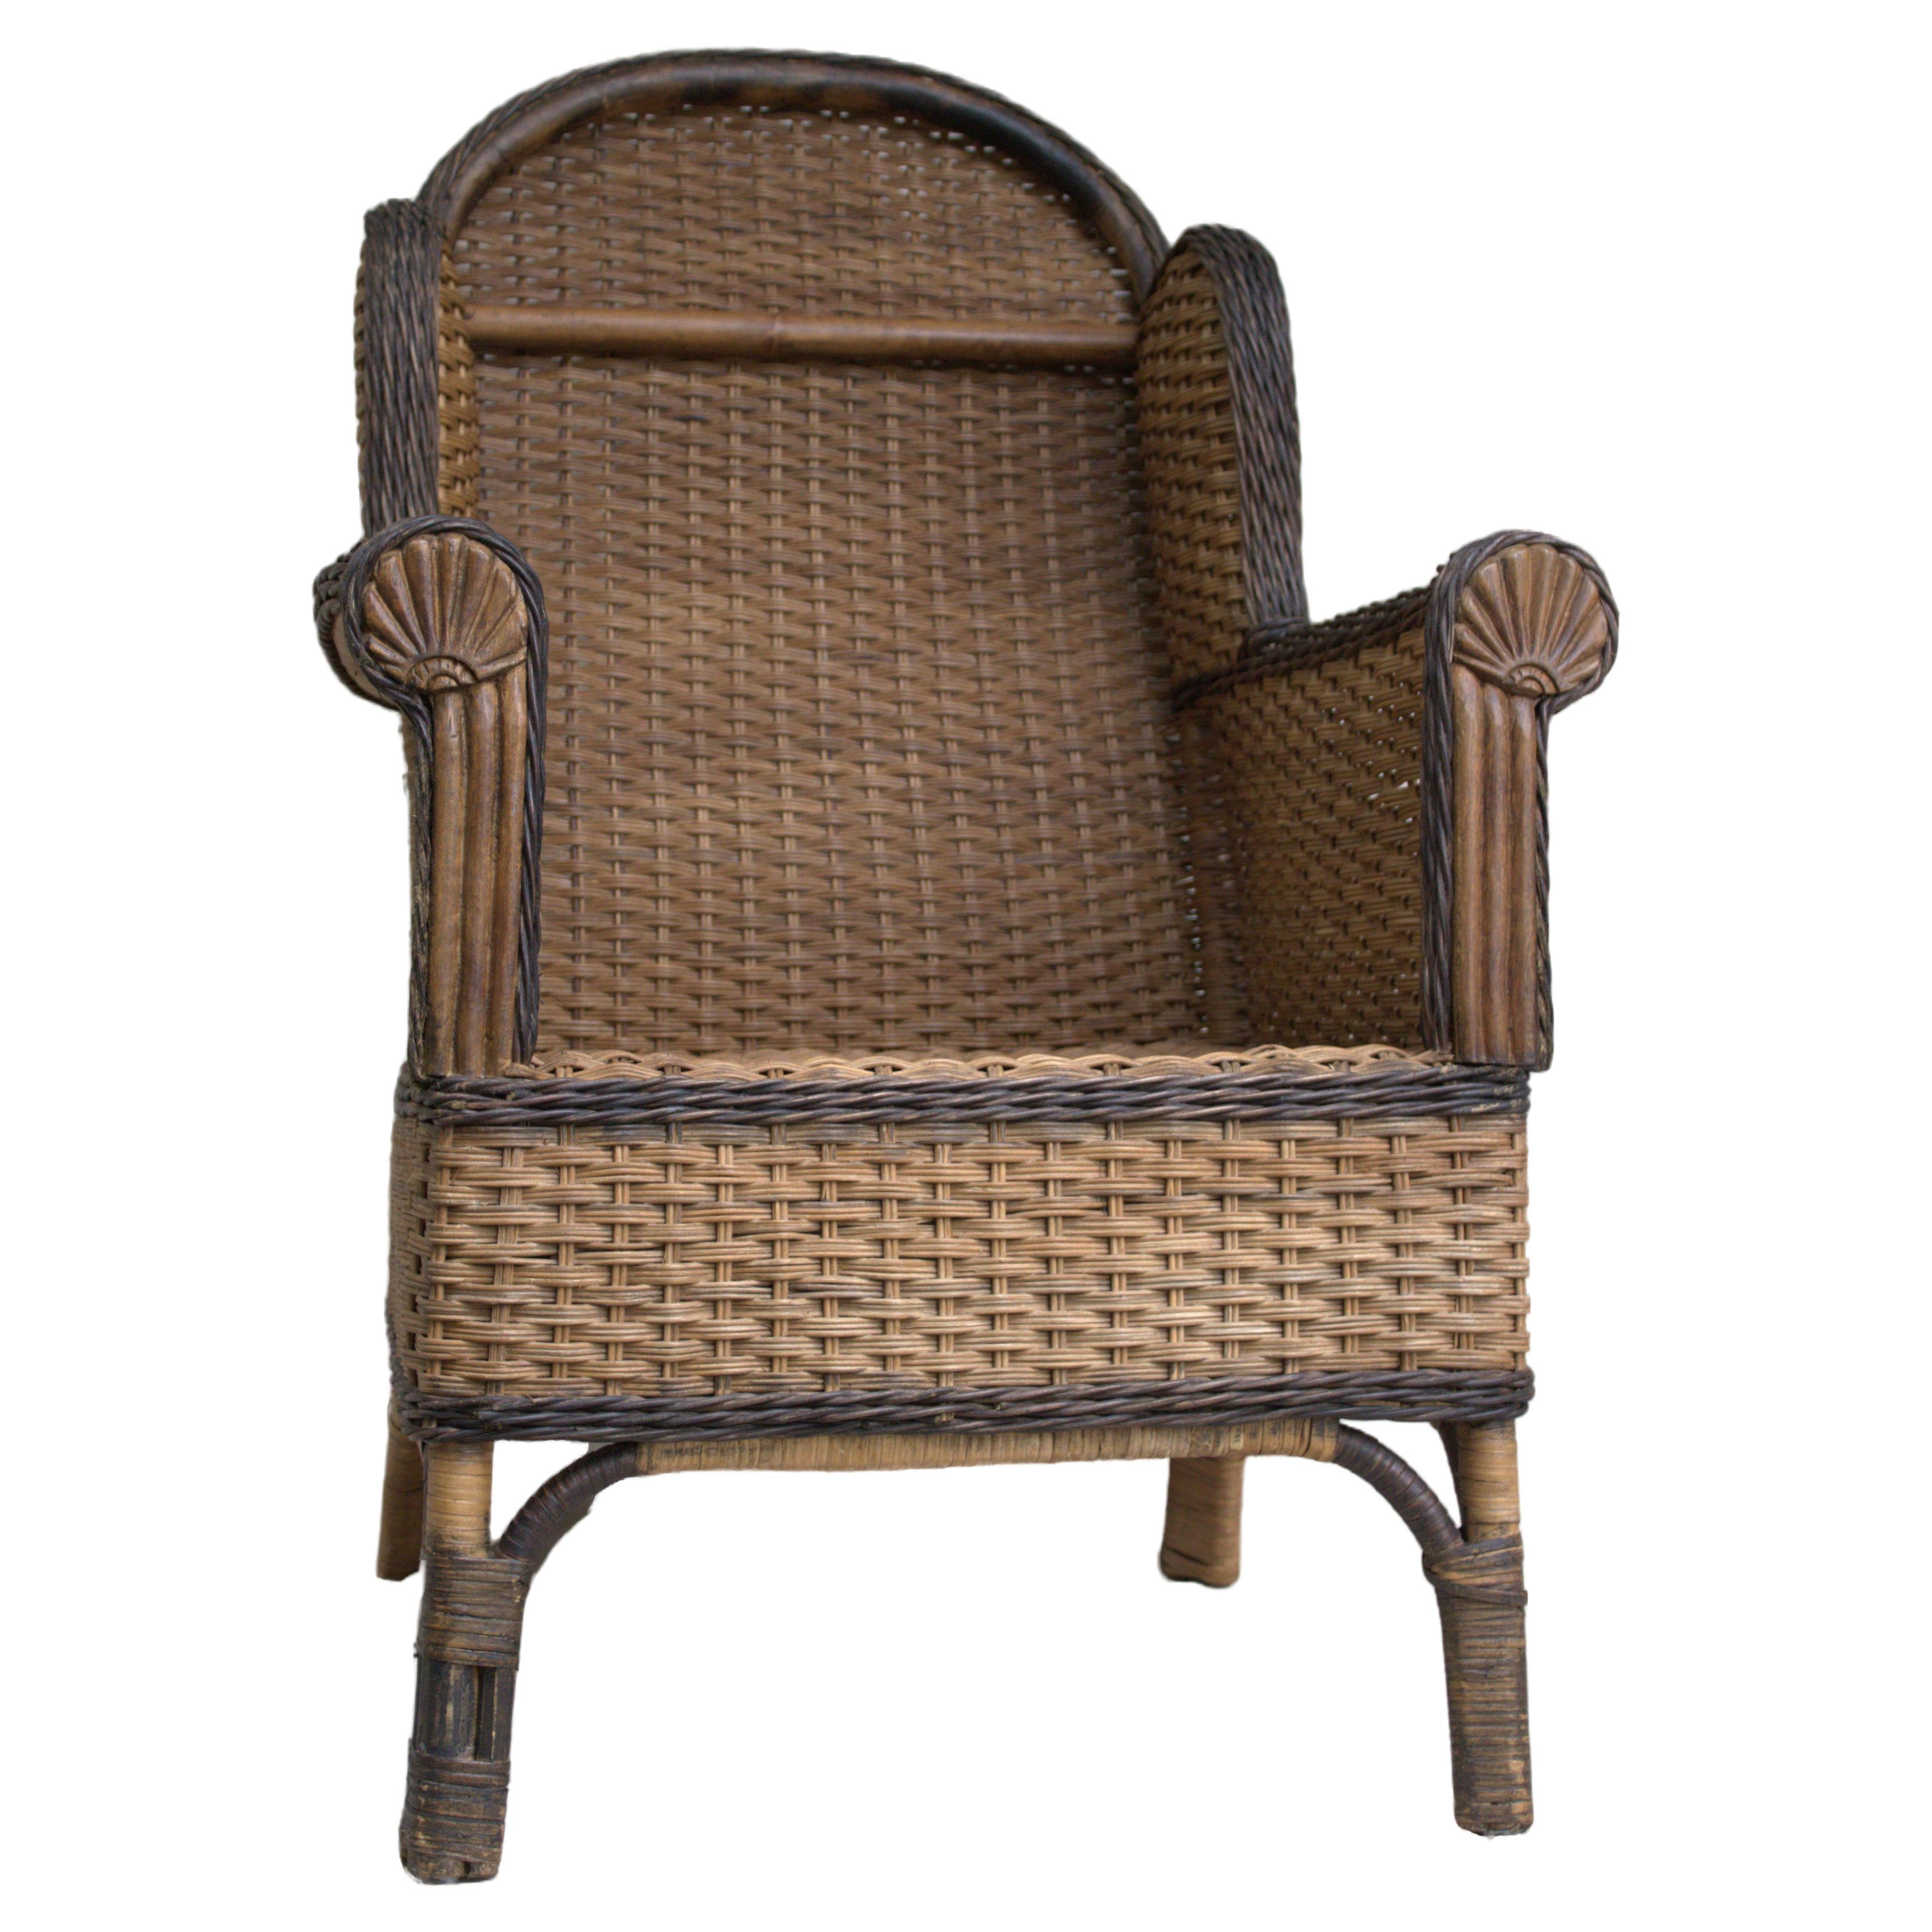 Arm Chair in Wickered Artistry Rattan - Possible Italian Originated - XX Century For Sale